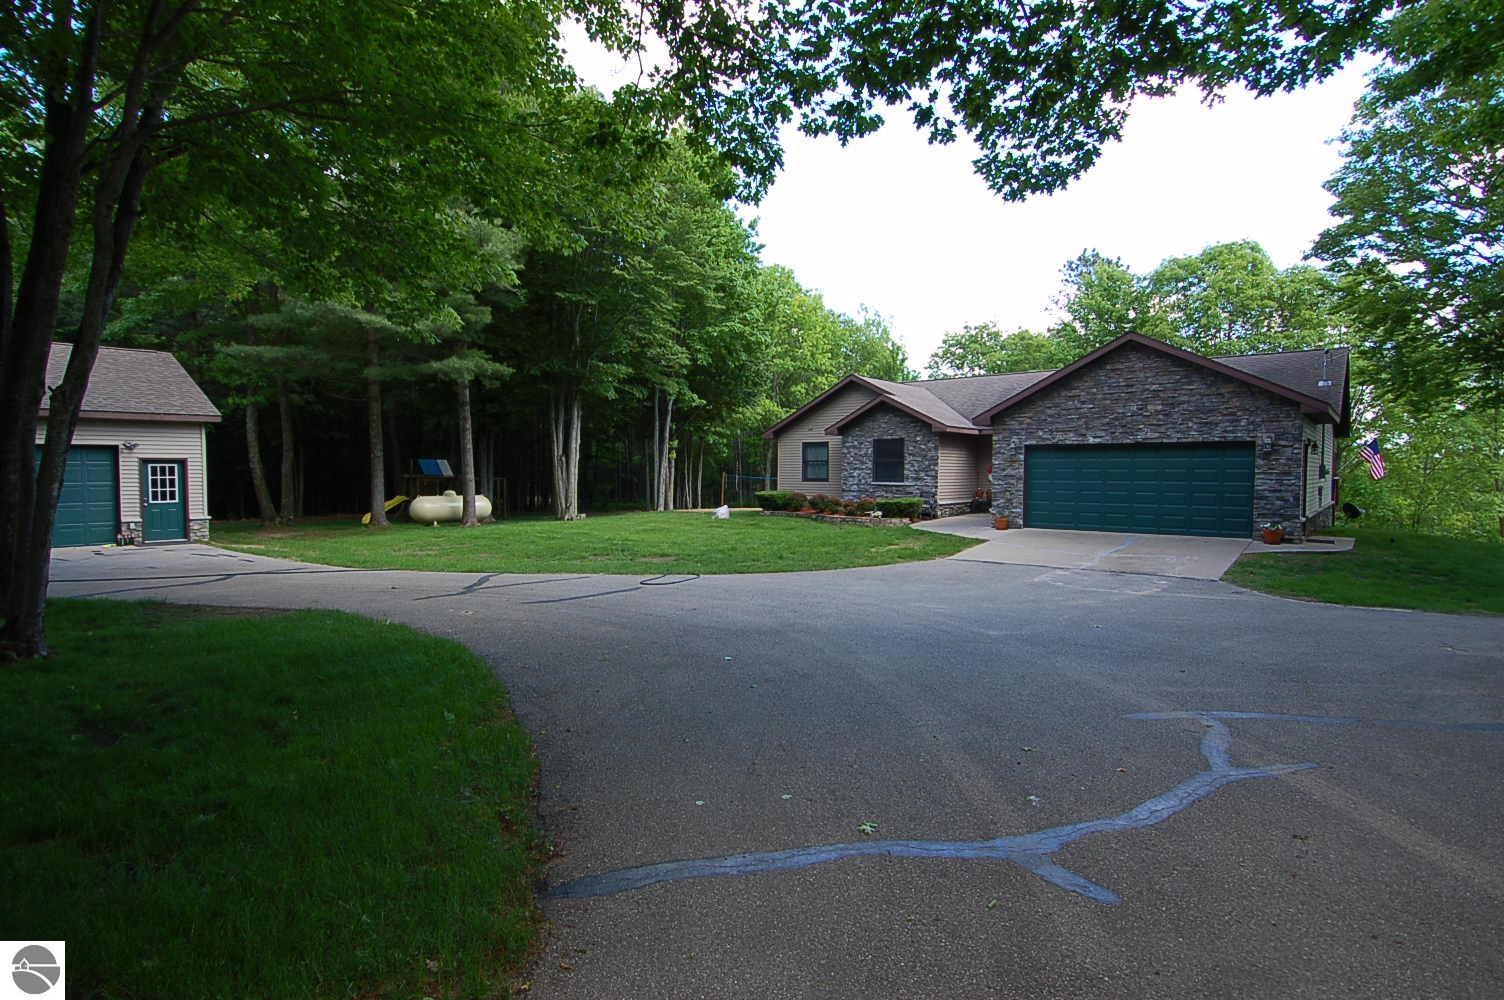 7681 Canthook Drive, Cadillac, MI 49601 photo 47 of 47